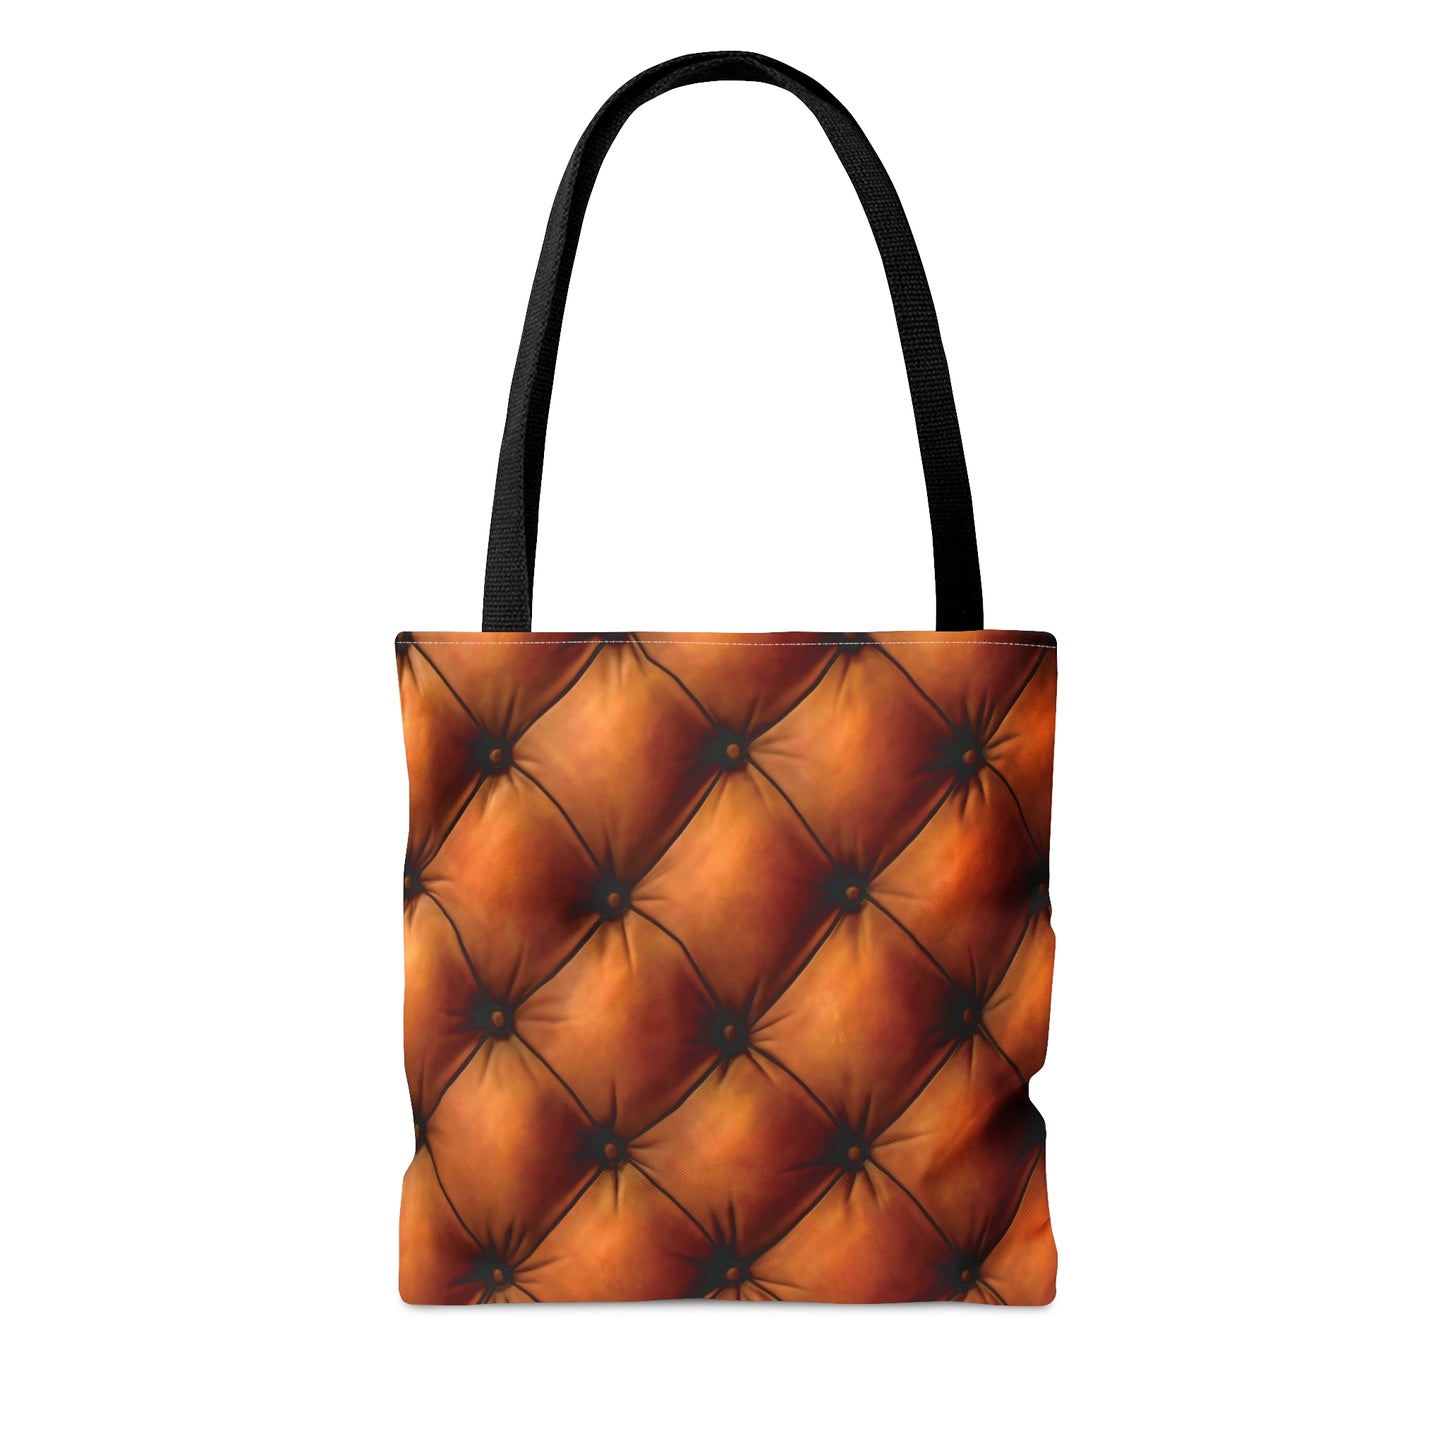 Tufted Leather - Tote Bag